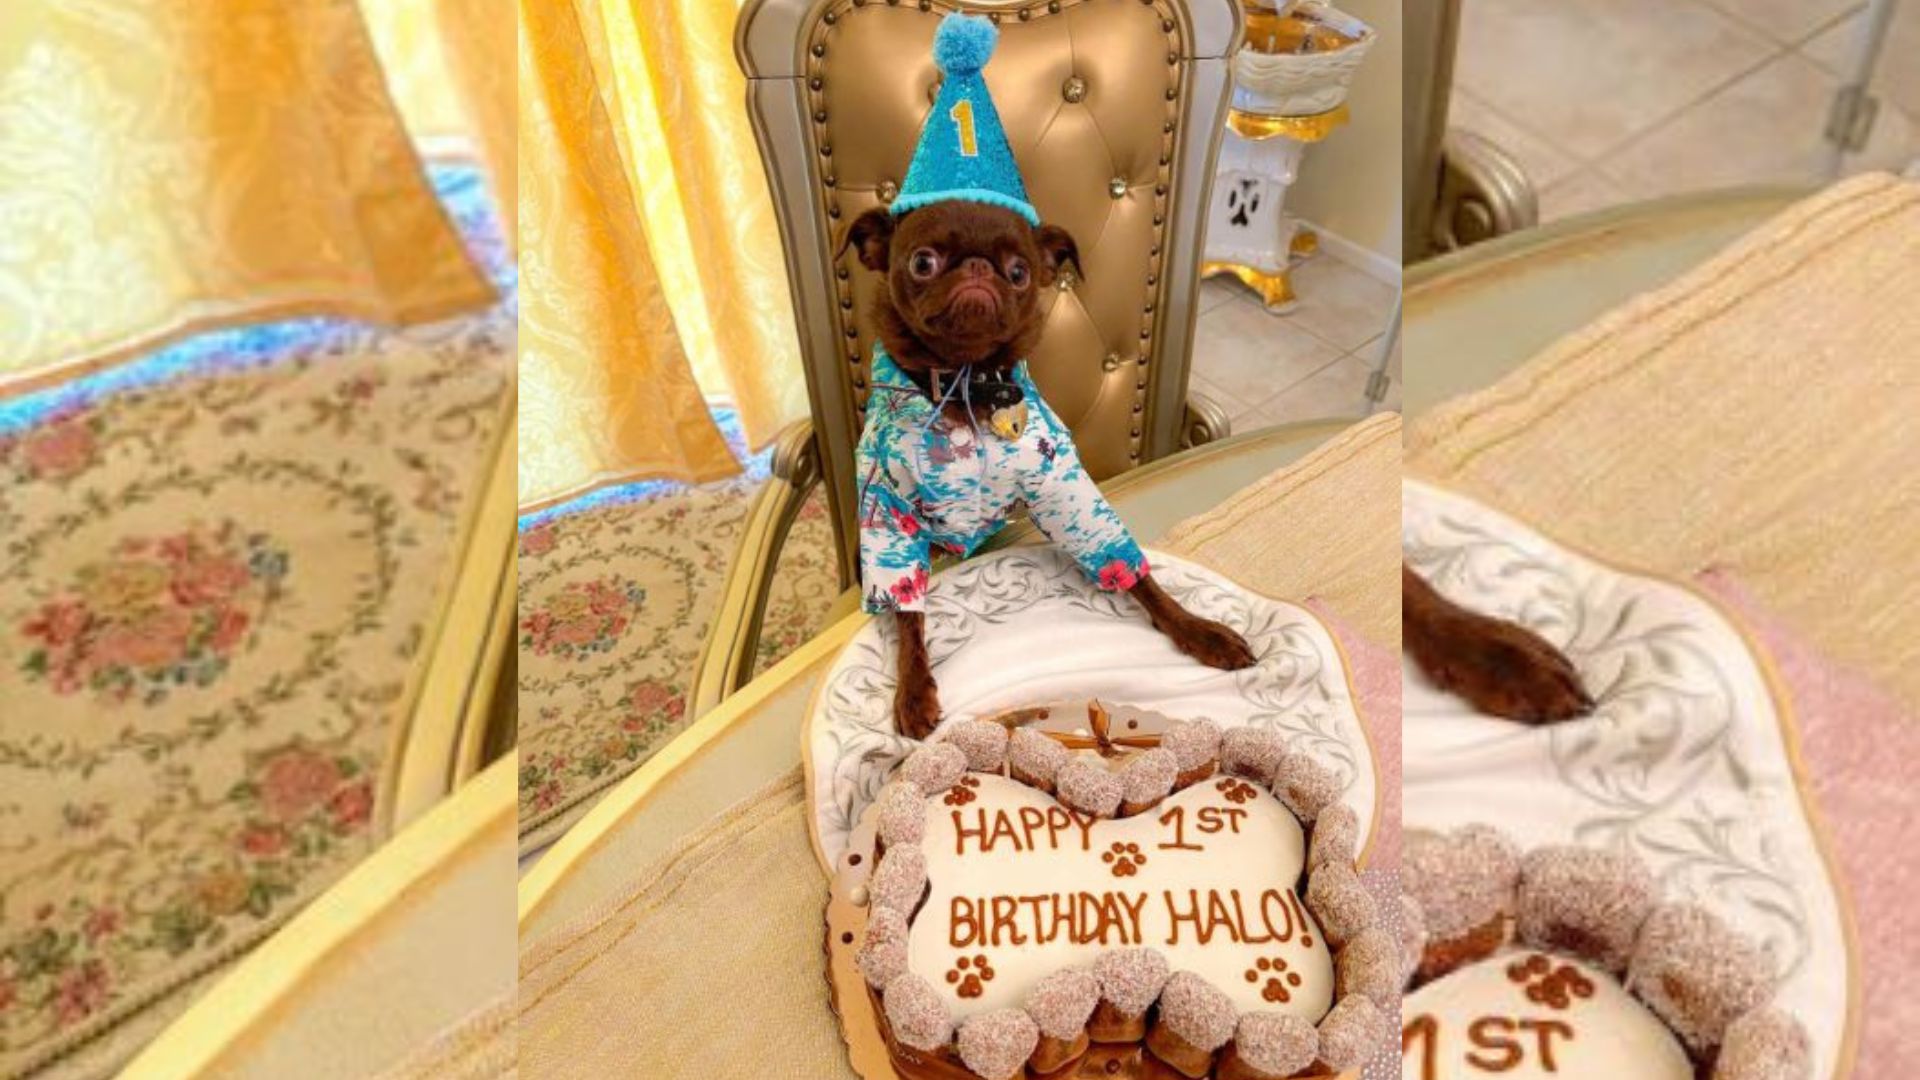 Tiny Dog With The Saddest Eyes Is Heartbroken That No One Showed Up To His Birthday Party